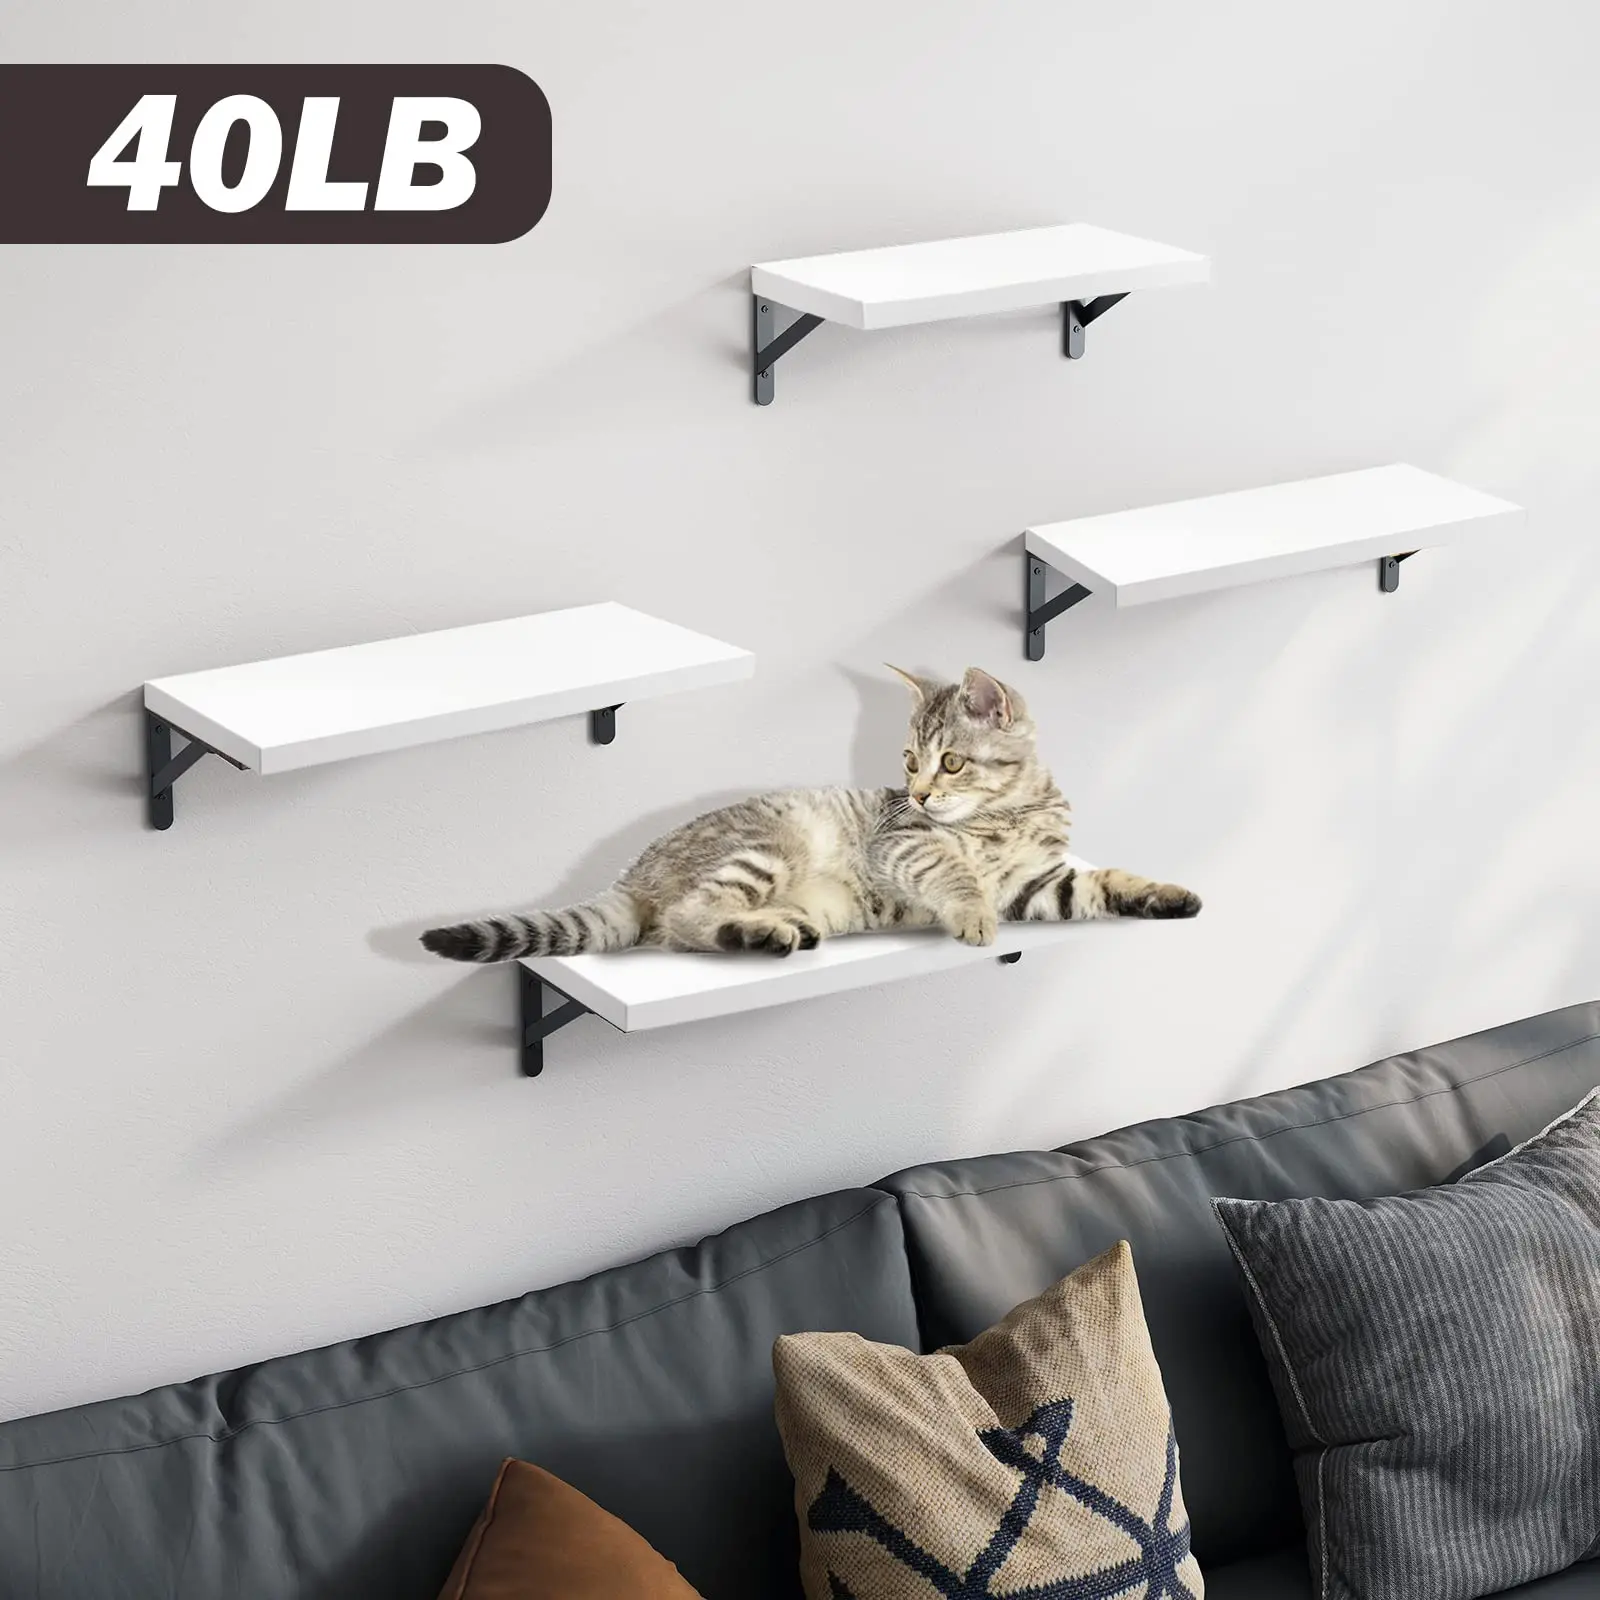 Set of 4 White Metal Book Living Room Wall Mounted Hanging Storage Home Decor Cat Wooden Wall Shelf Floating Shelves